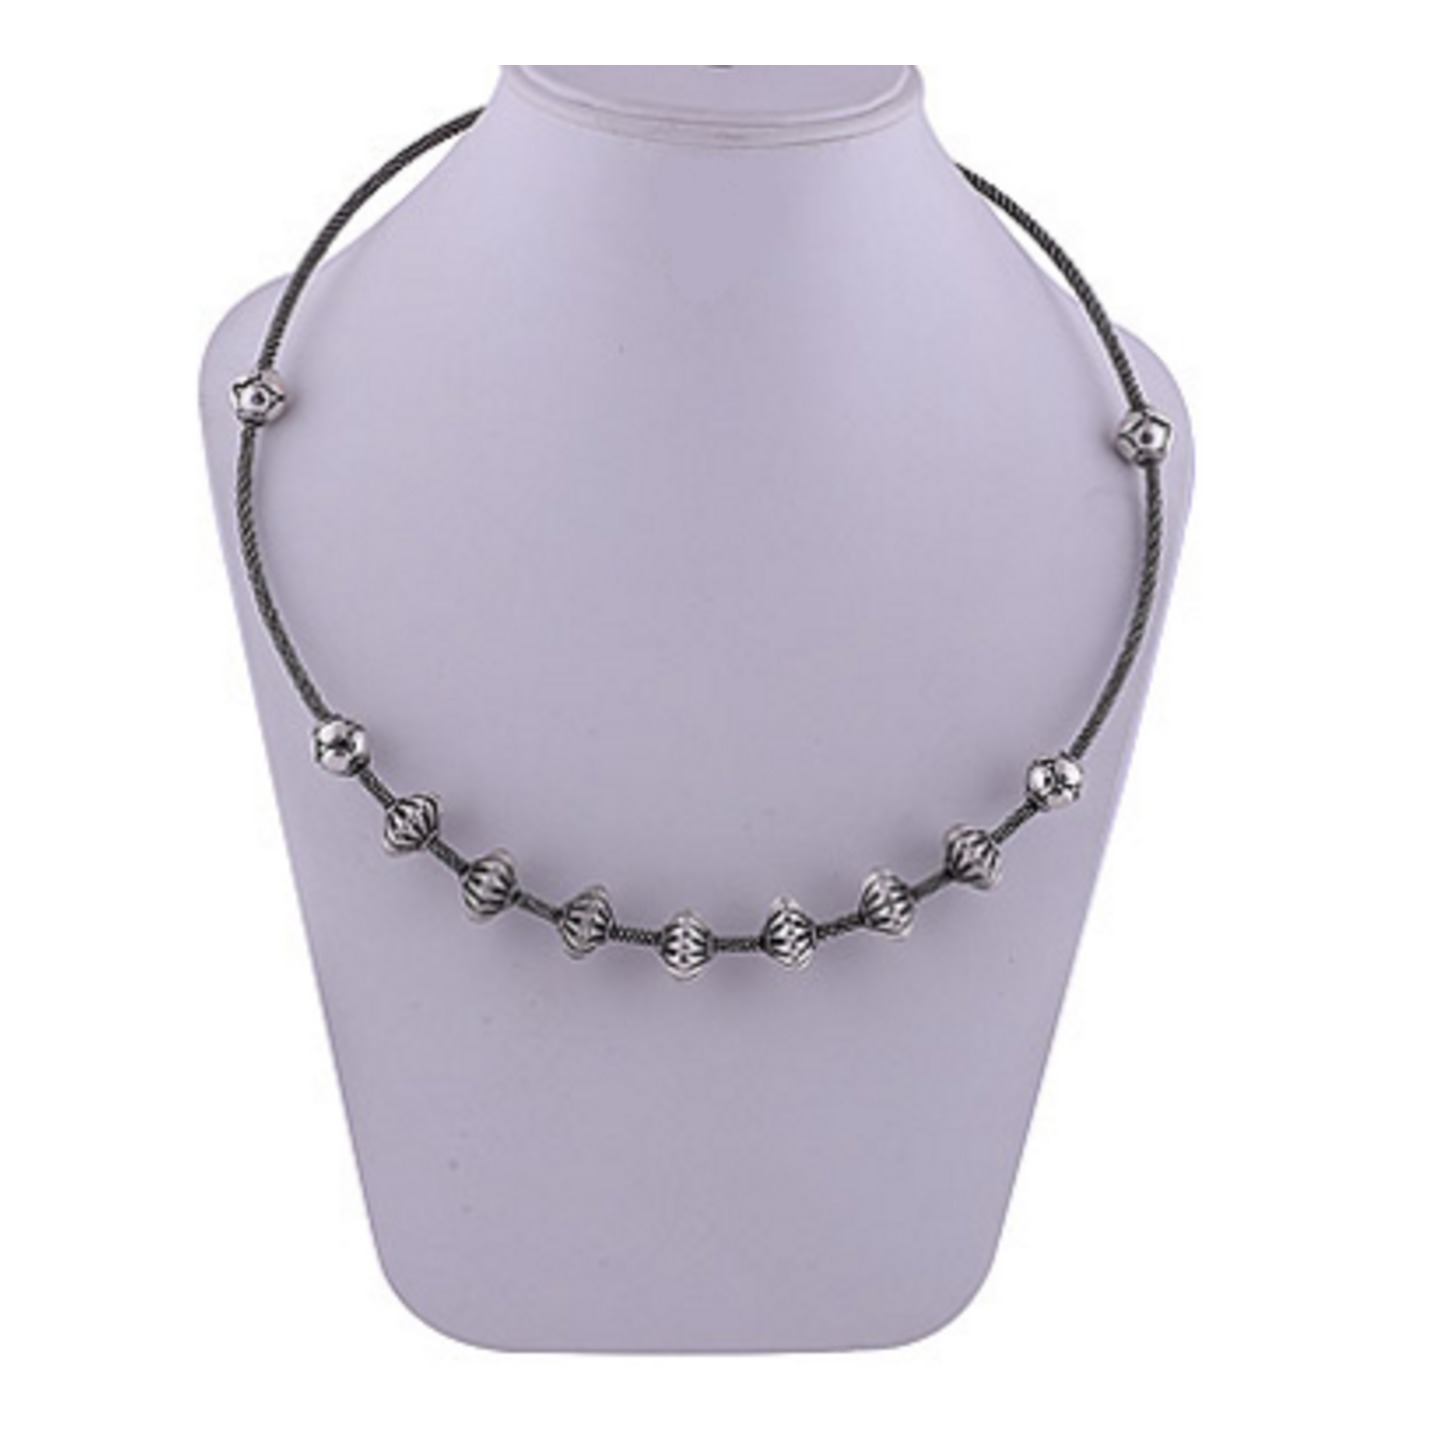 The Foxy Silver Necklace